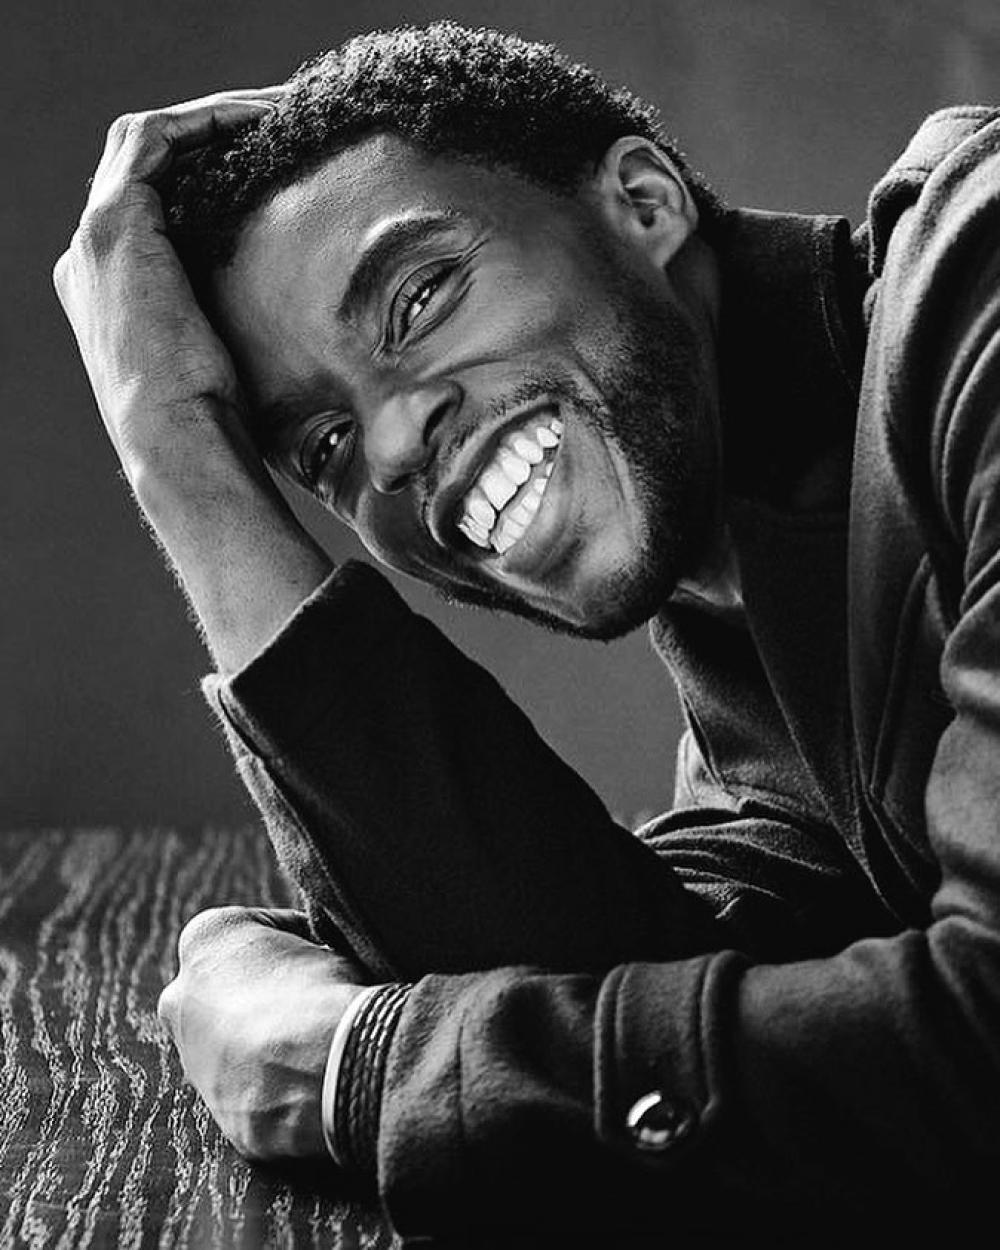 The Weekend Leader - Chadwick Boseman's 'Black Panther' character won't be recast by Marvel